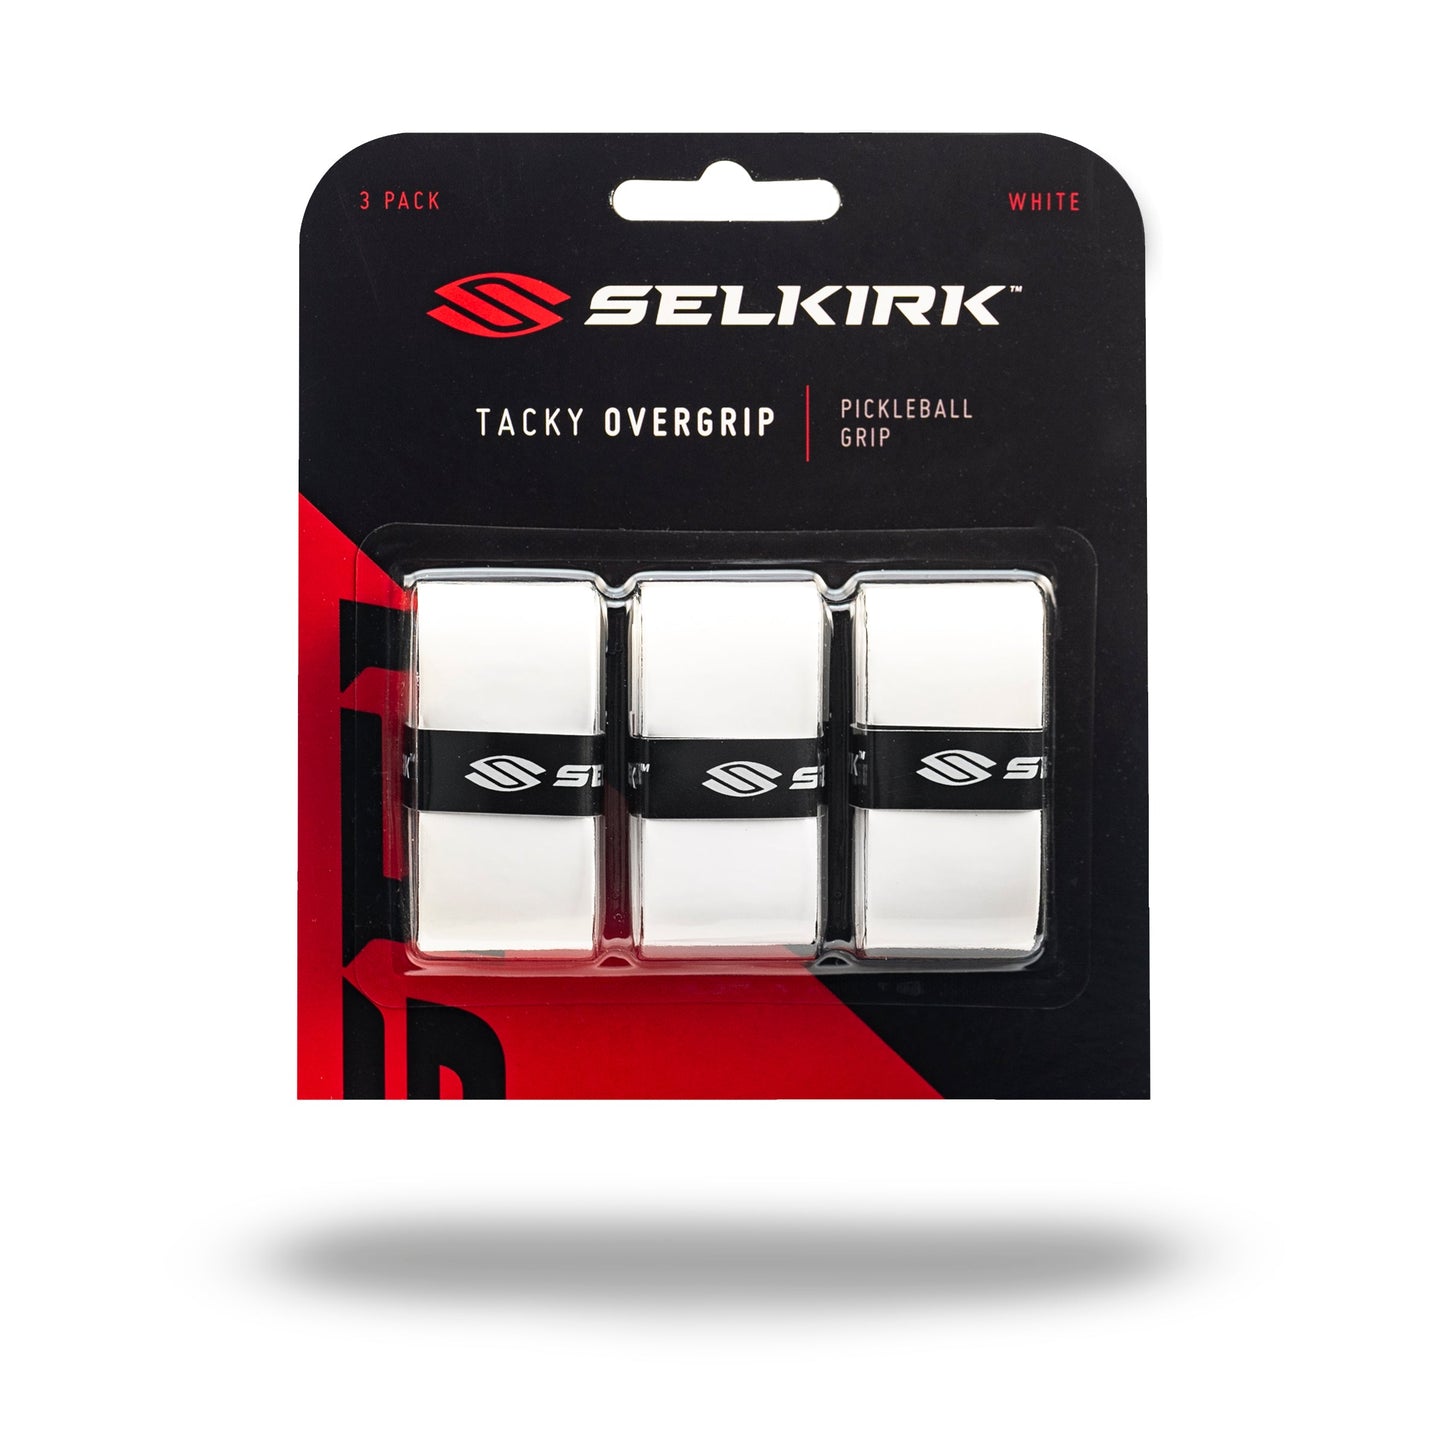 SELKIRK 3 PACK TACKY OVERGRIPS